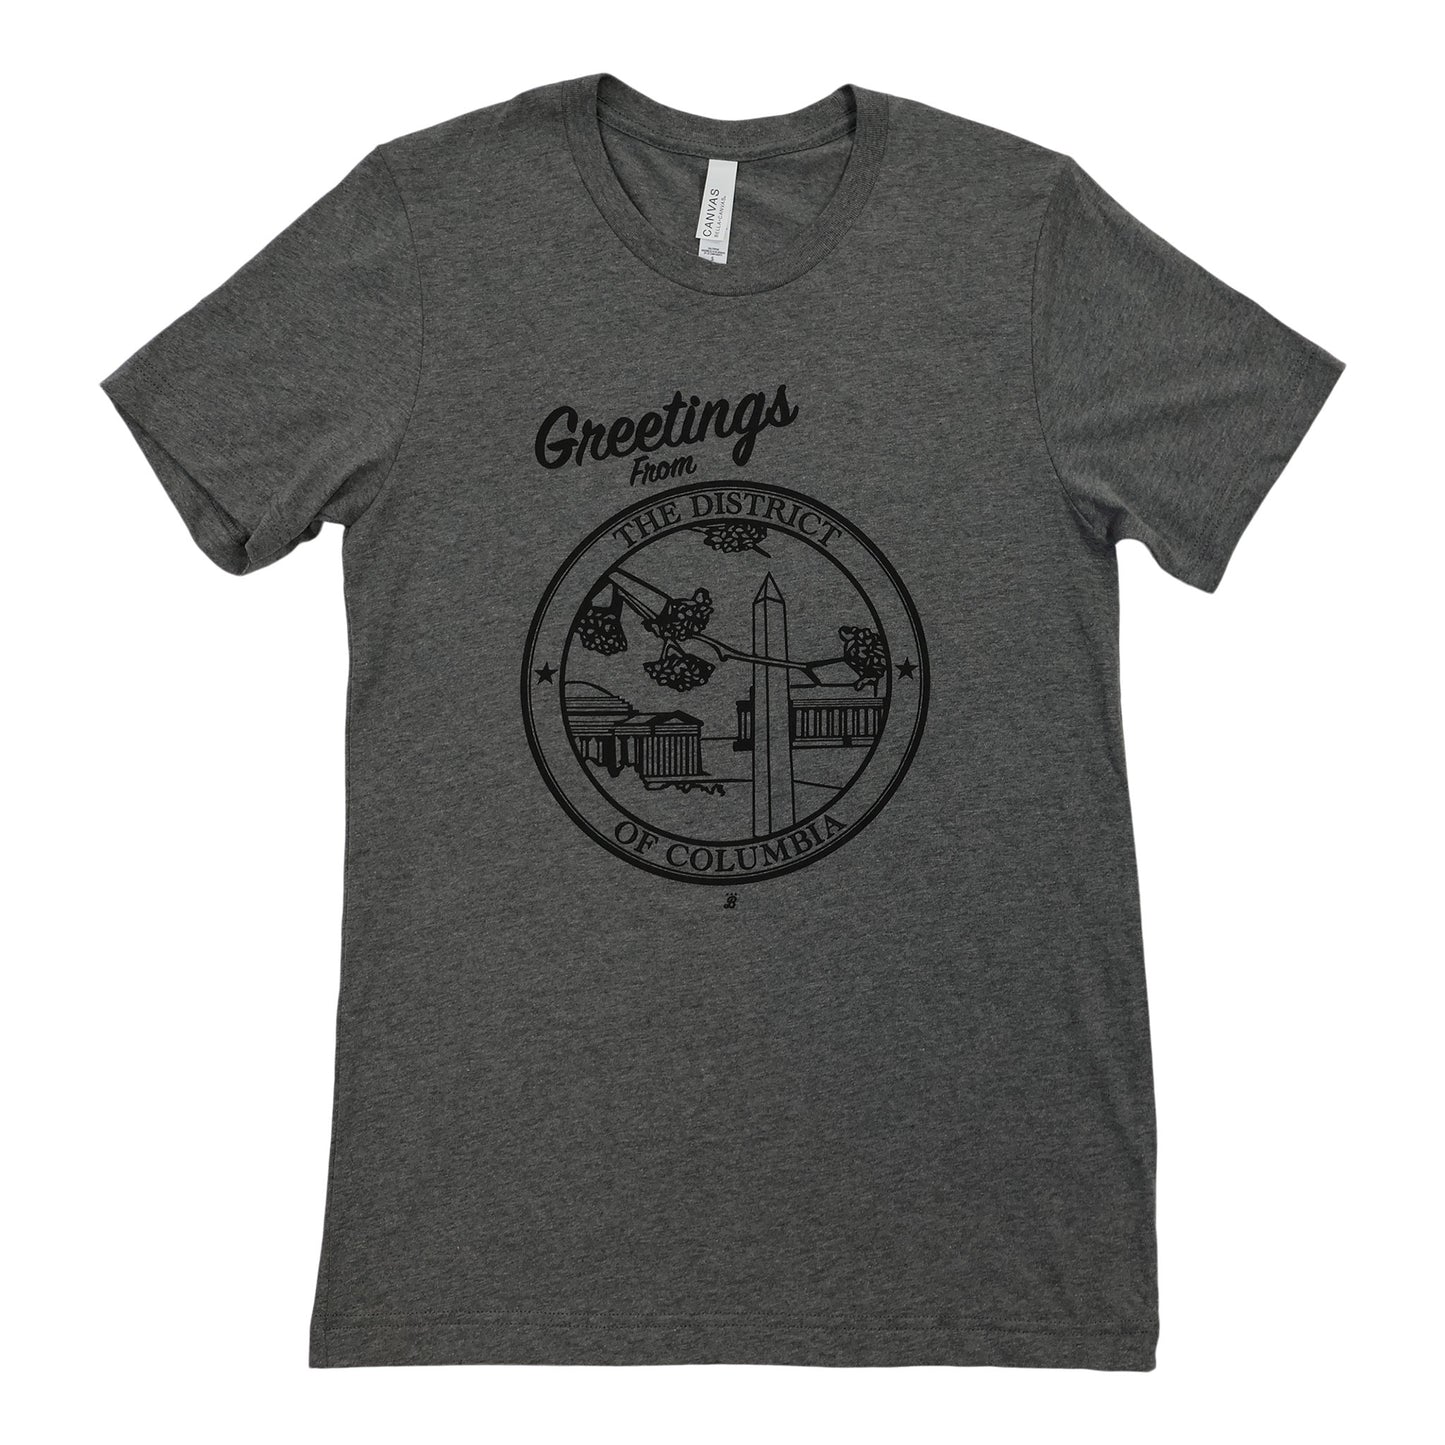 Unisex 'Greetings From The District' t-shirt